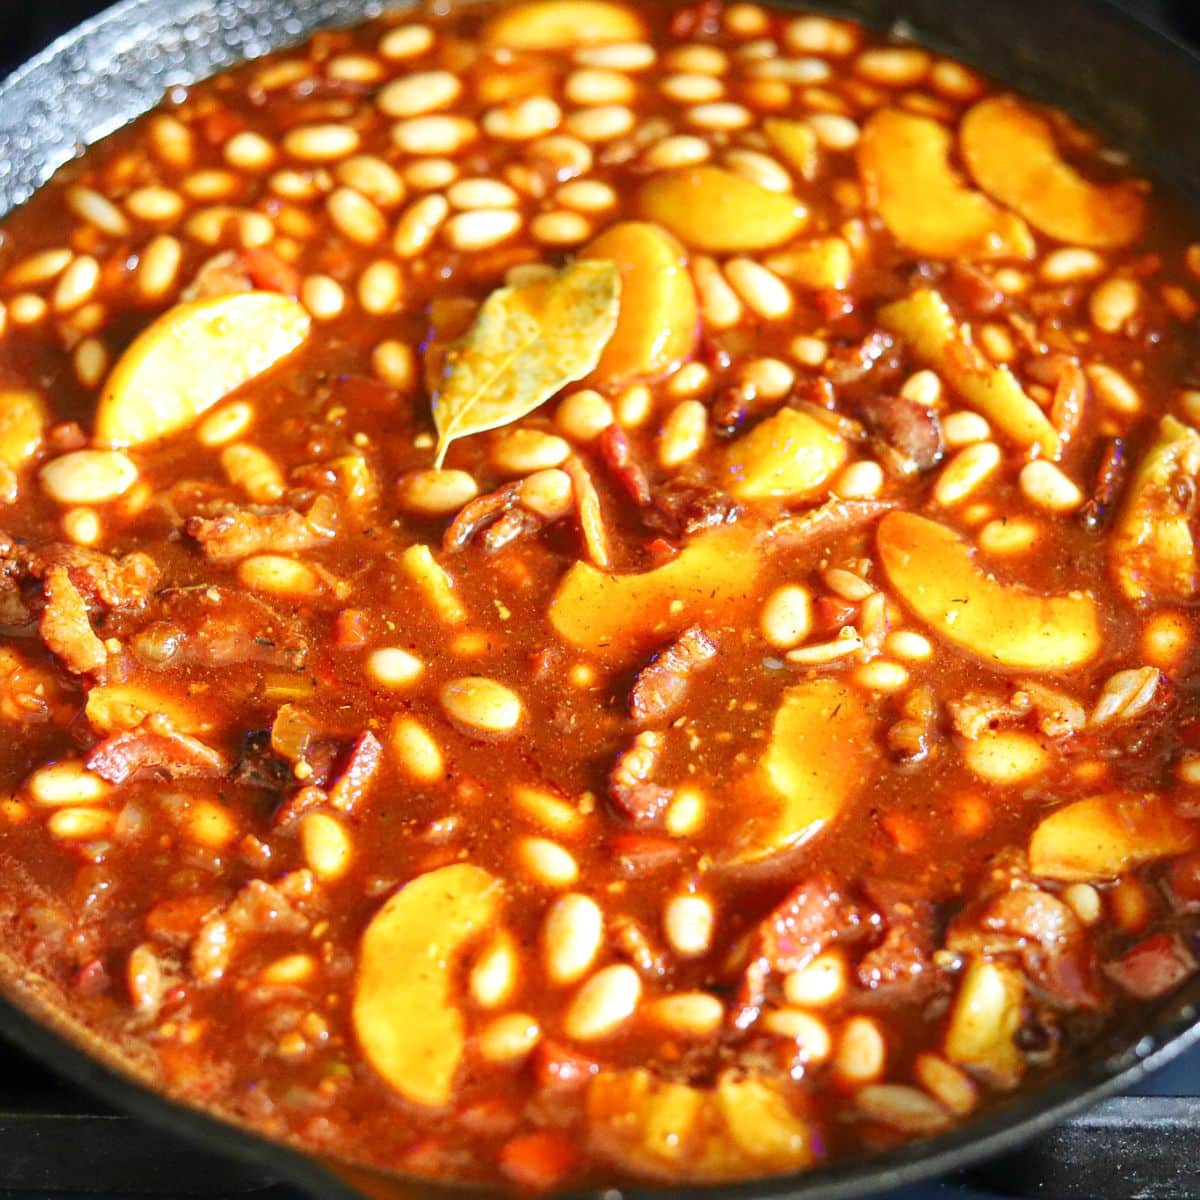 baked beans with peached being prepared in a cast iron skillet.